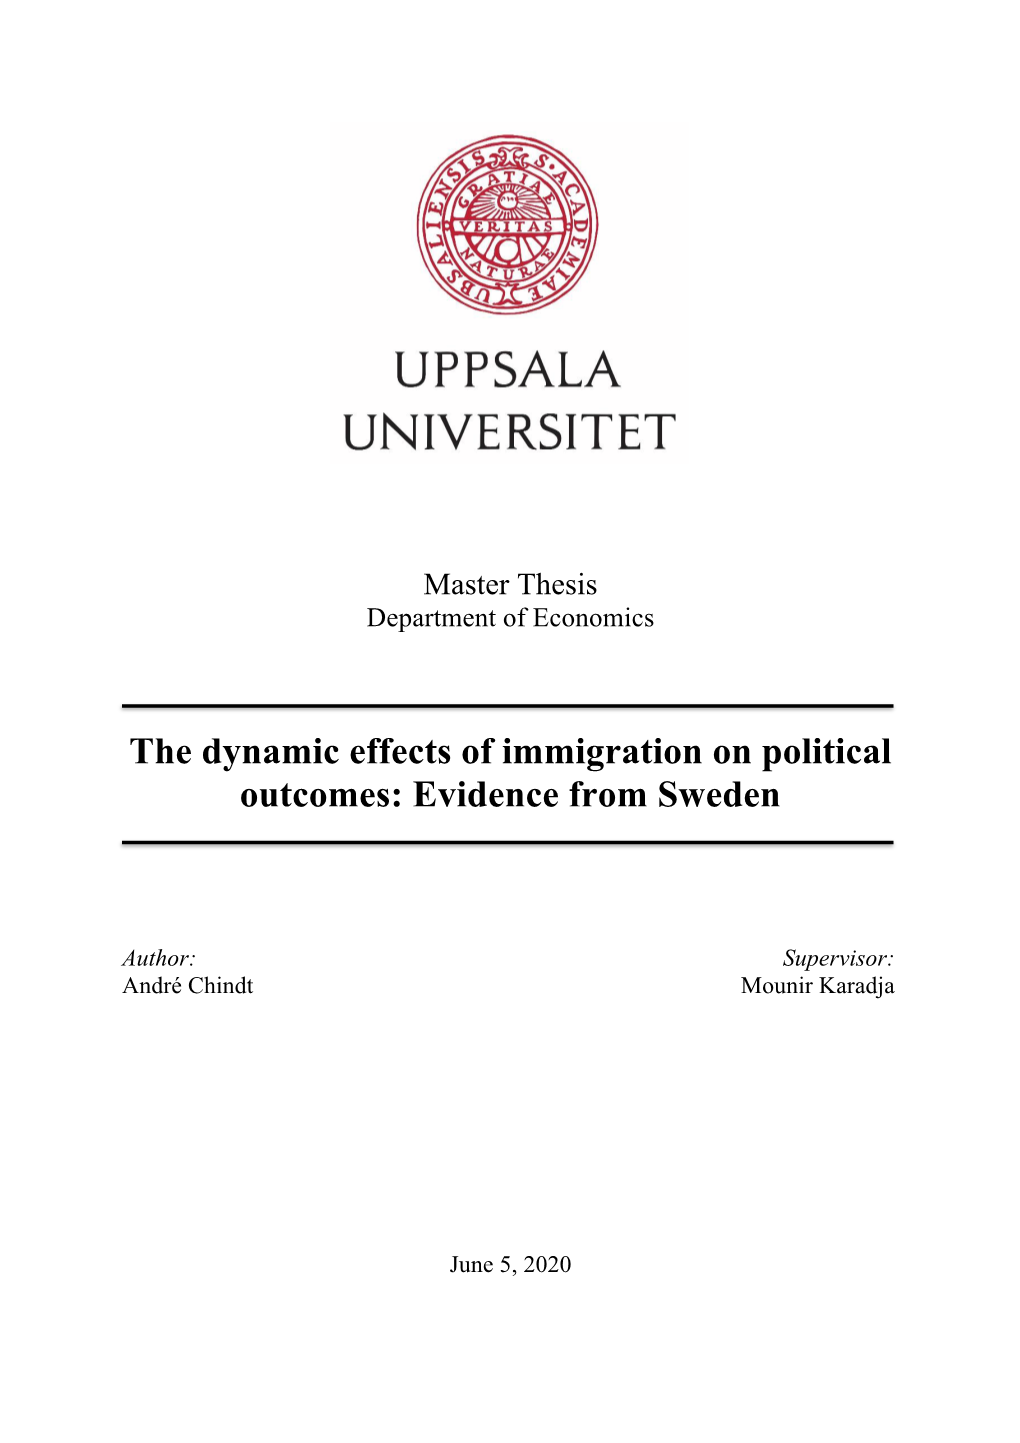 The Dynamic Effects of Immigration on Political Outcomes: Evidence from Sweden